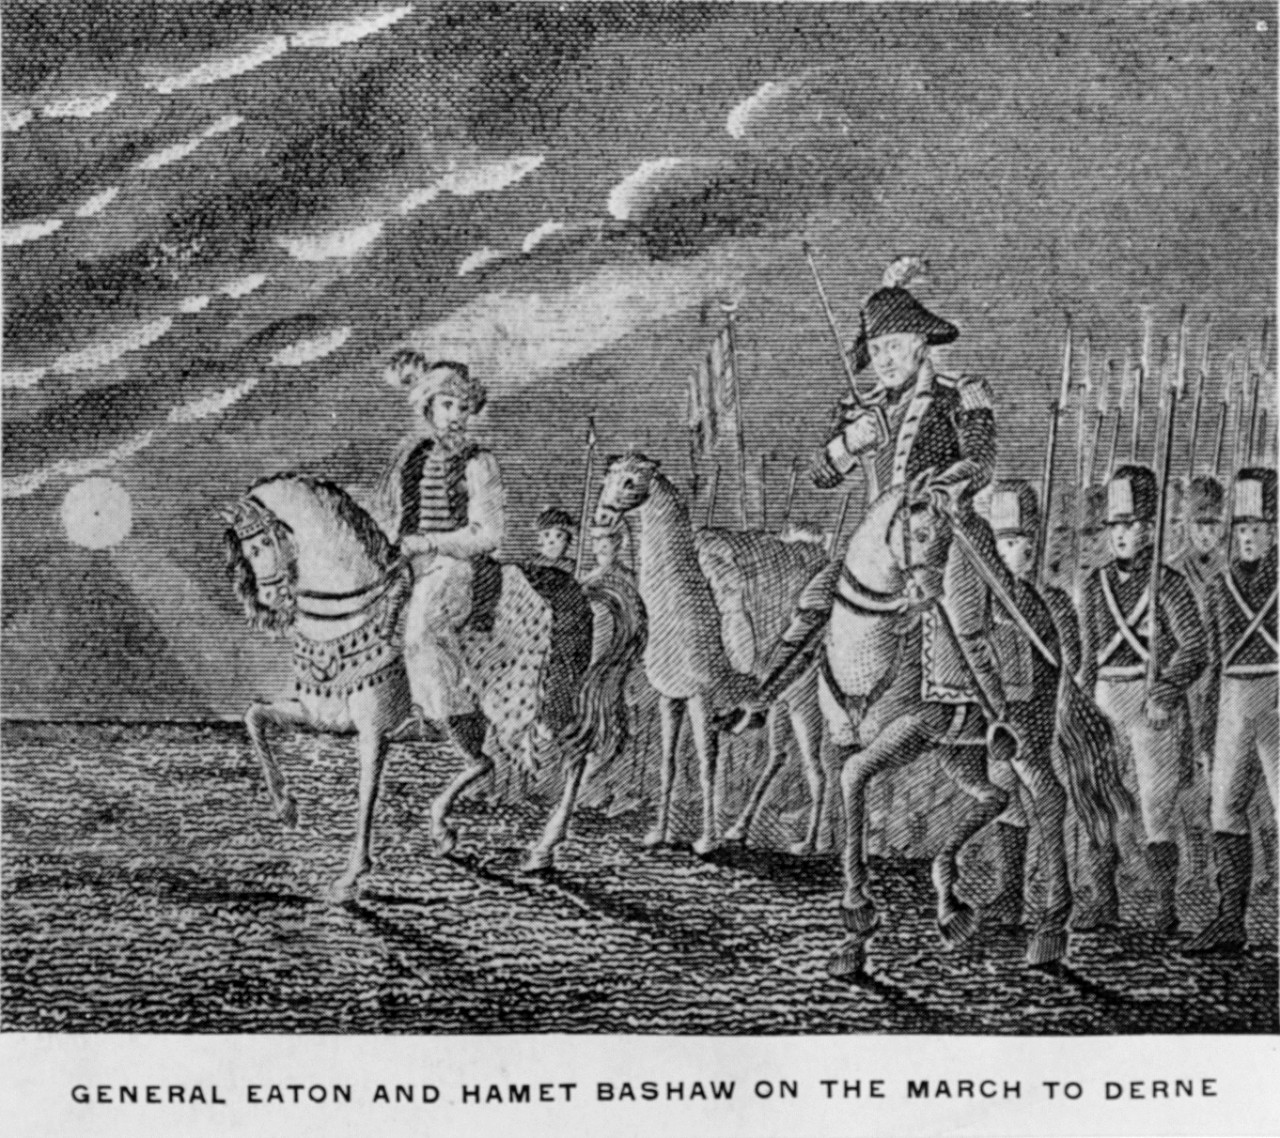 General Eaton and Hamet Bashaw on the March to Derne circa 1805